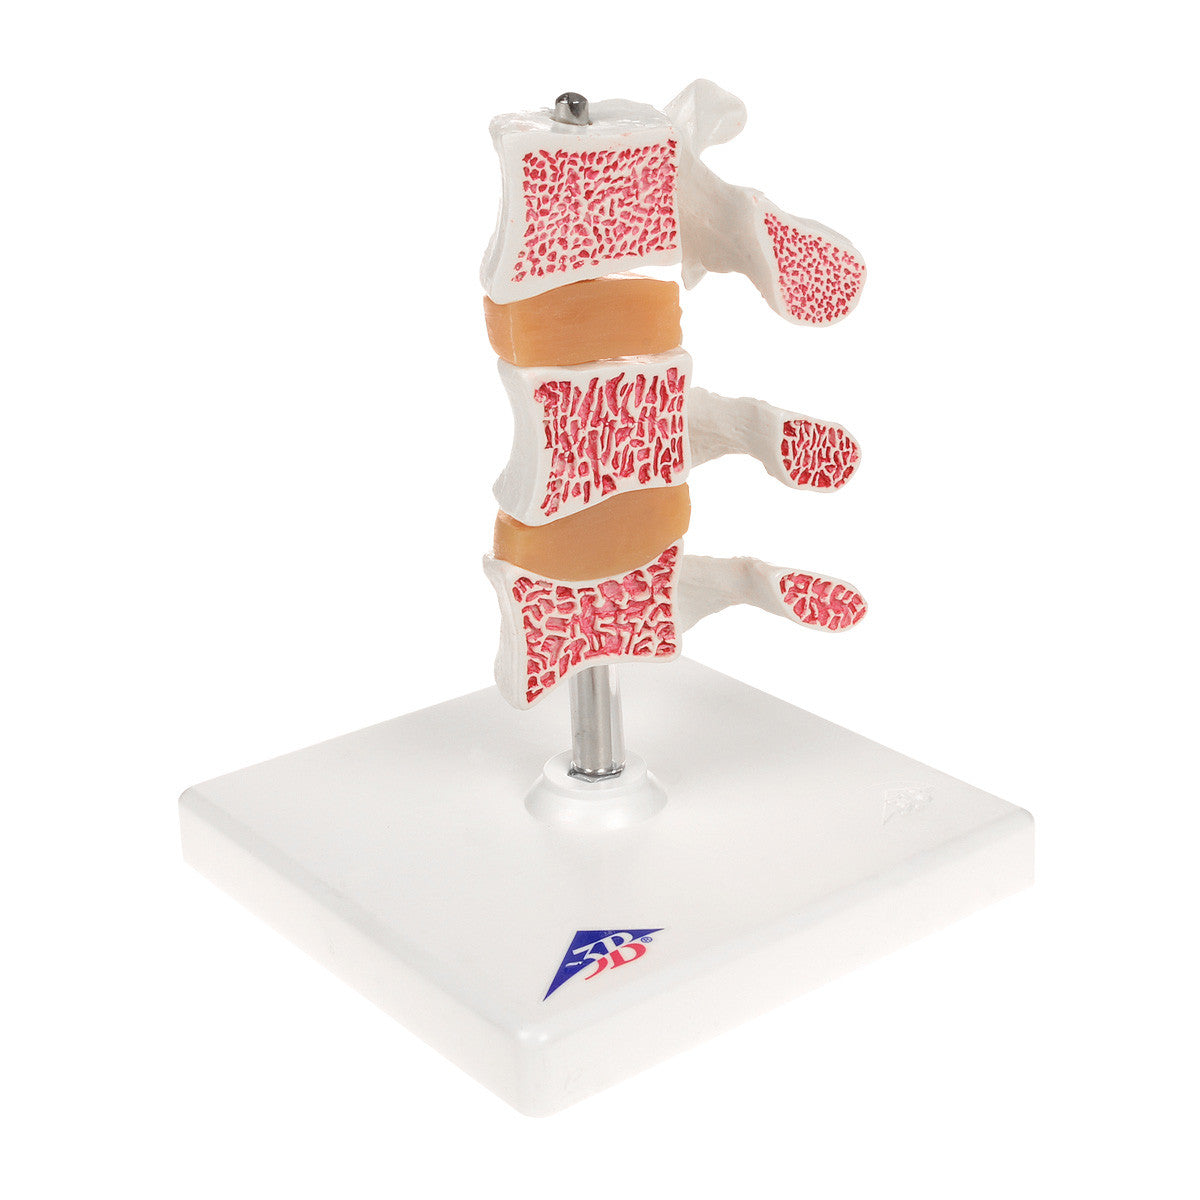 Deluxe Osteoporosis Model - cross section view